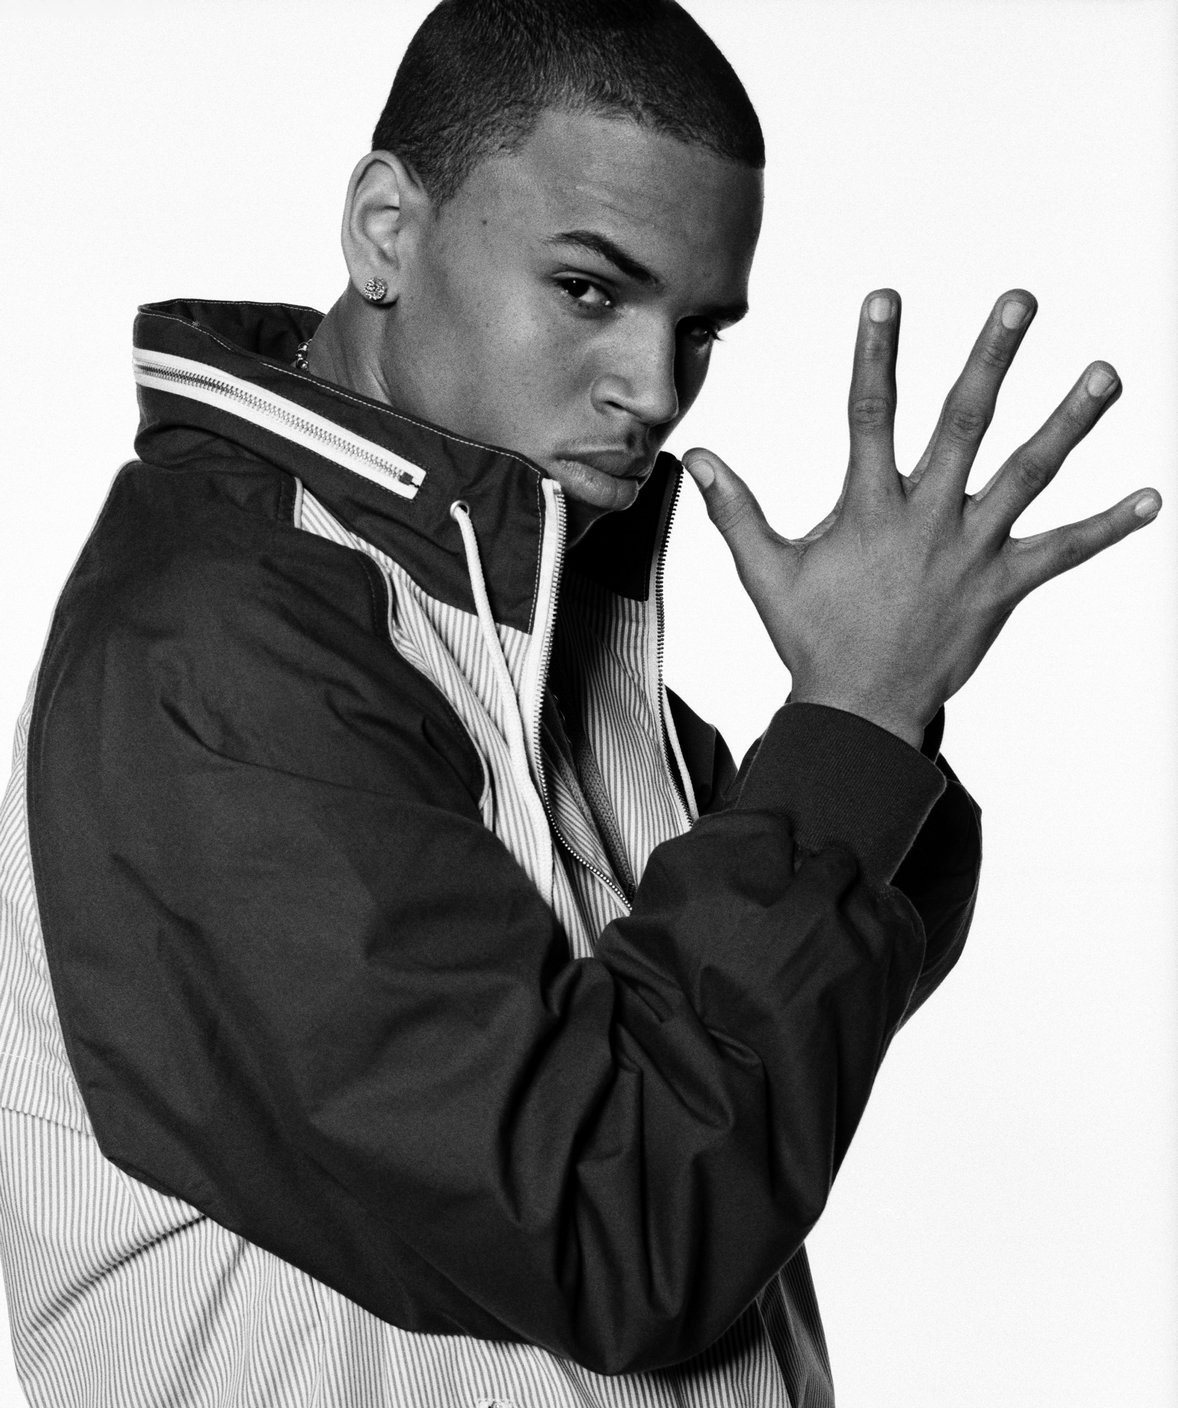 Chris Brown Profile and Photos 2012 | Hollywood Stars